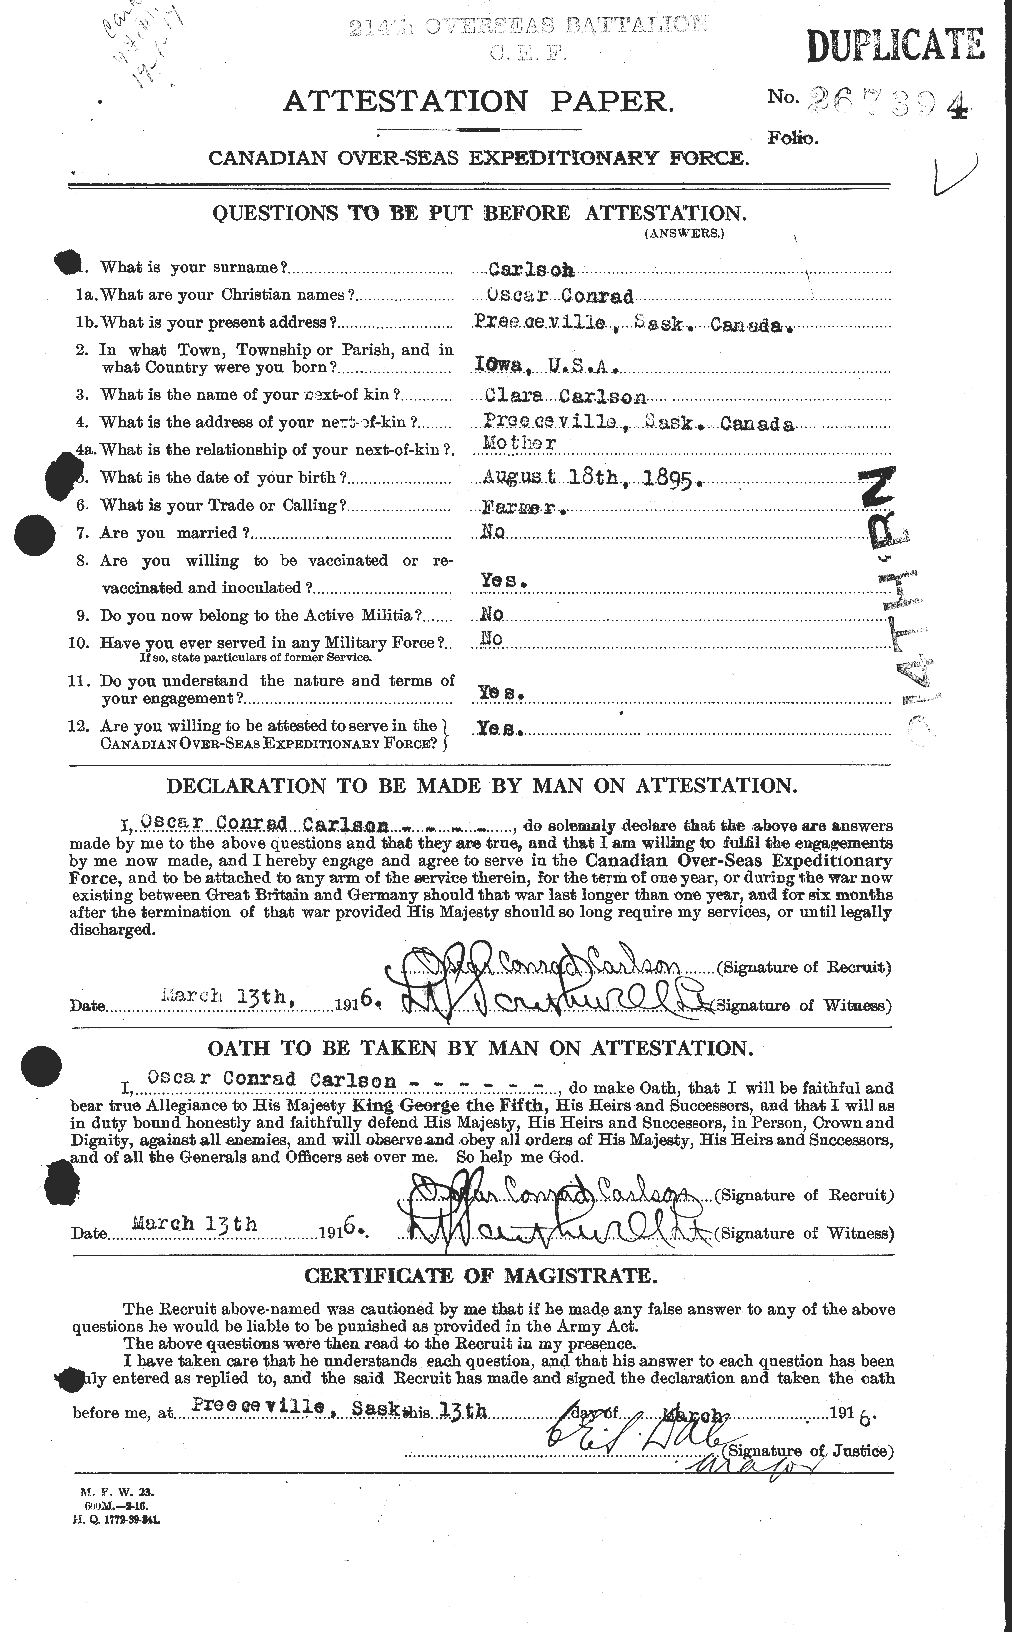 Personnel Records of the First World War - CEF 004585a